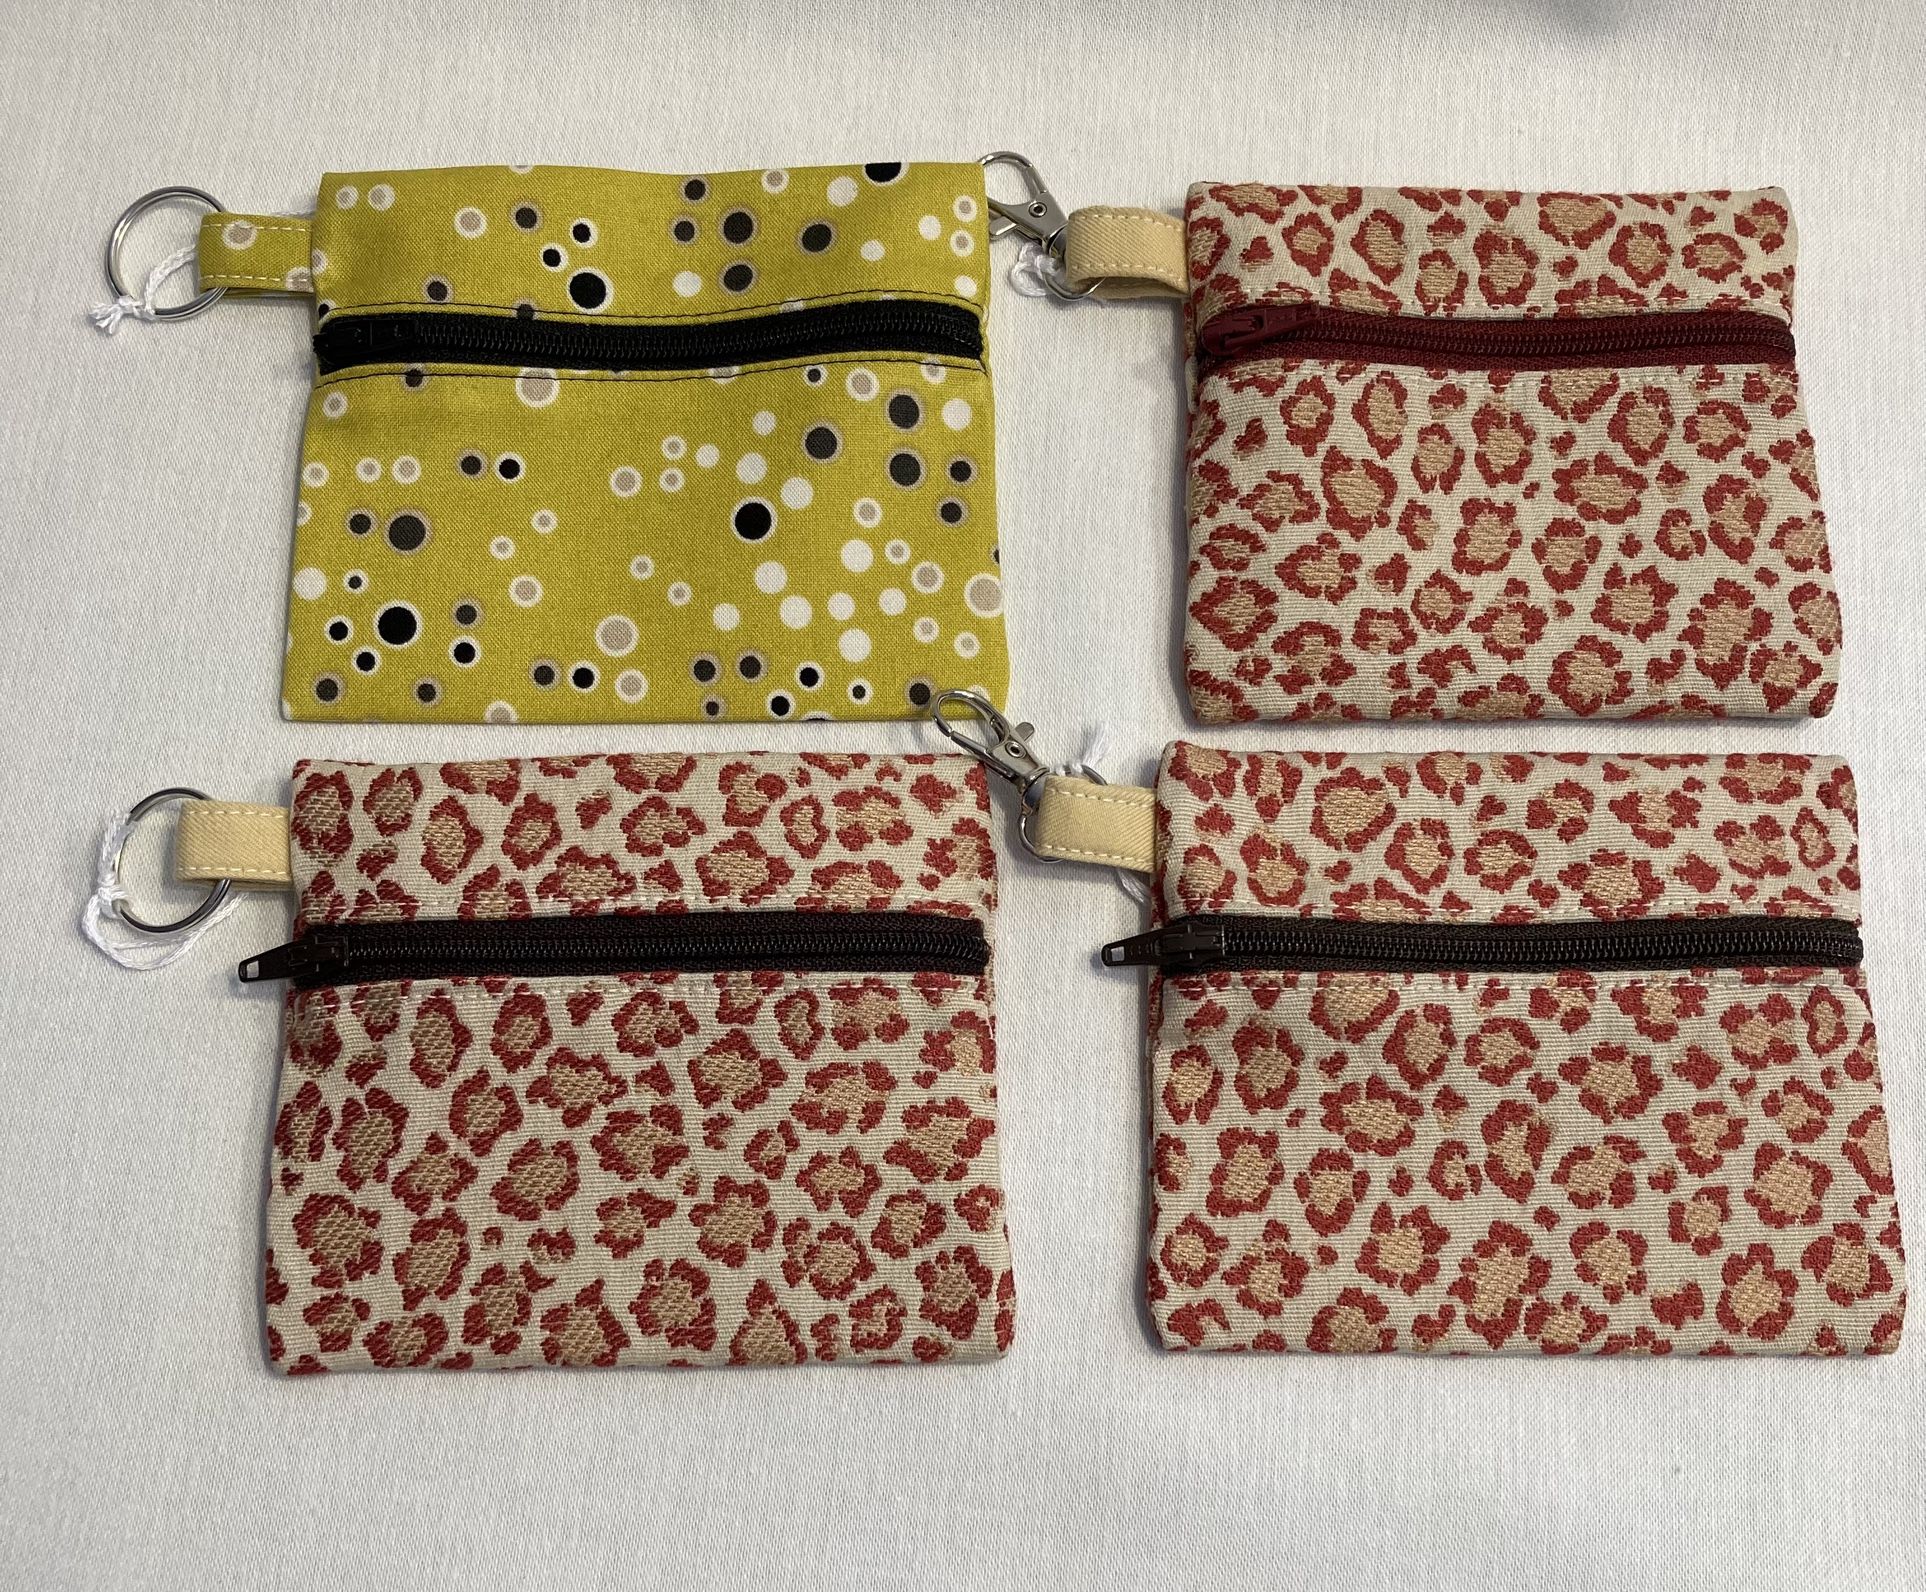 Small Fabric Zipper Pouch, Coin Card Pouch, Purse Organizer, Ear Buds Pouch.  Many Designs For Adults Or Children. 